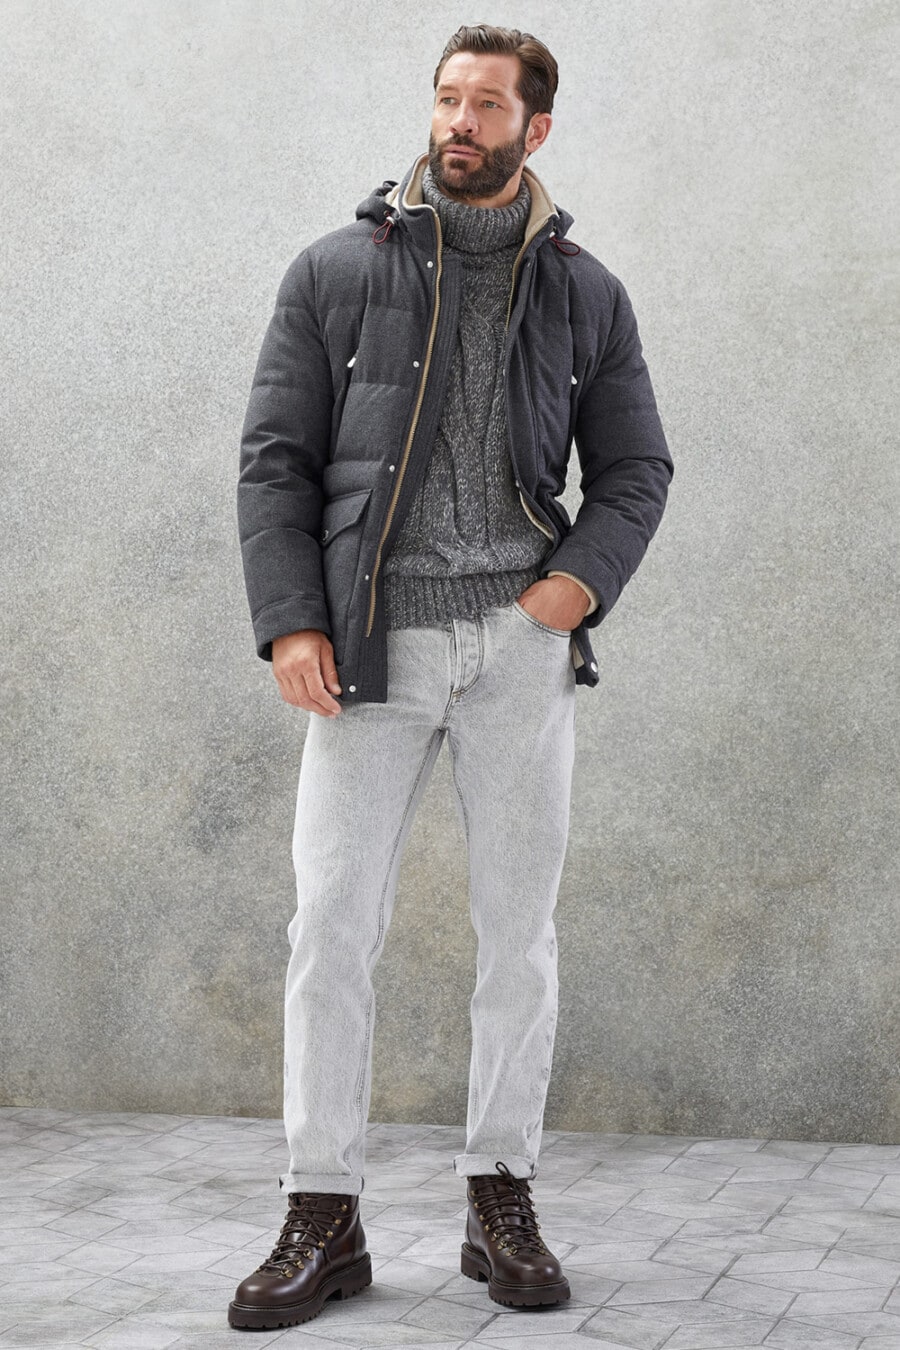 Men's light grey jeans, chunky grey cable knit turtleneck, dark grey puffer jacket and brown leather hiking boots outfit